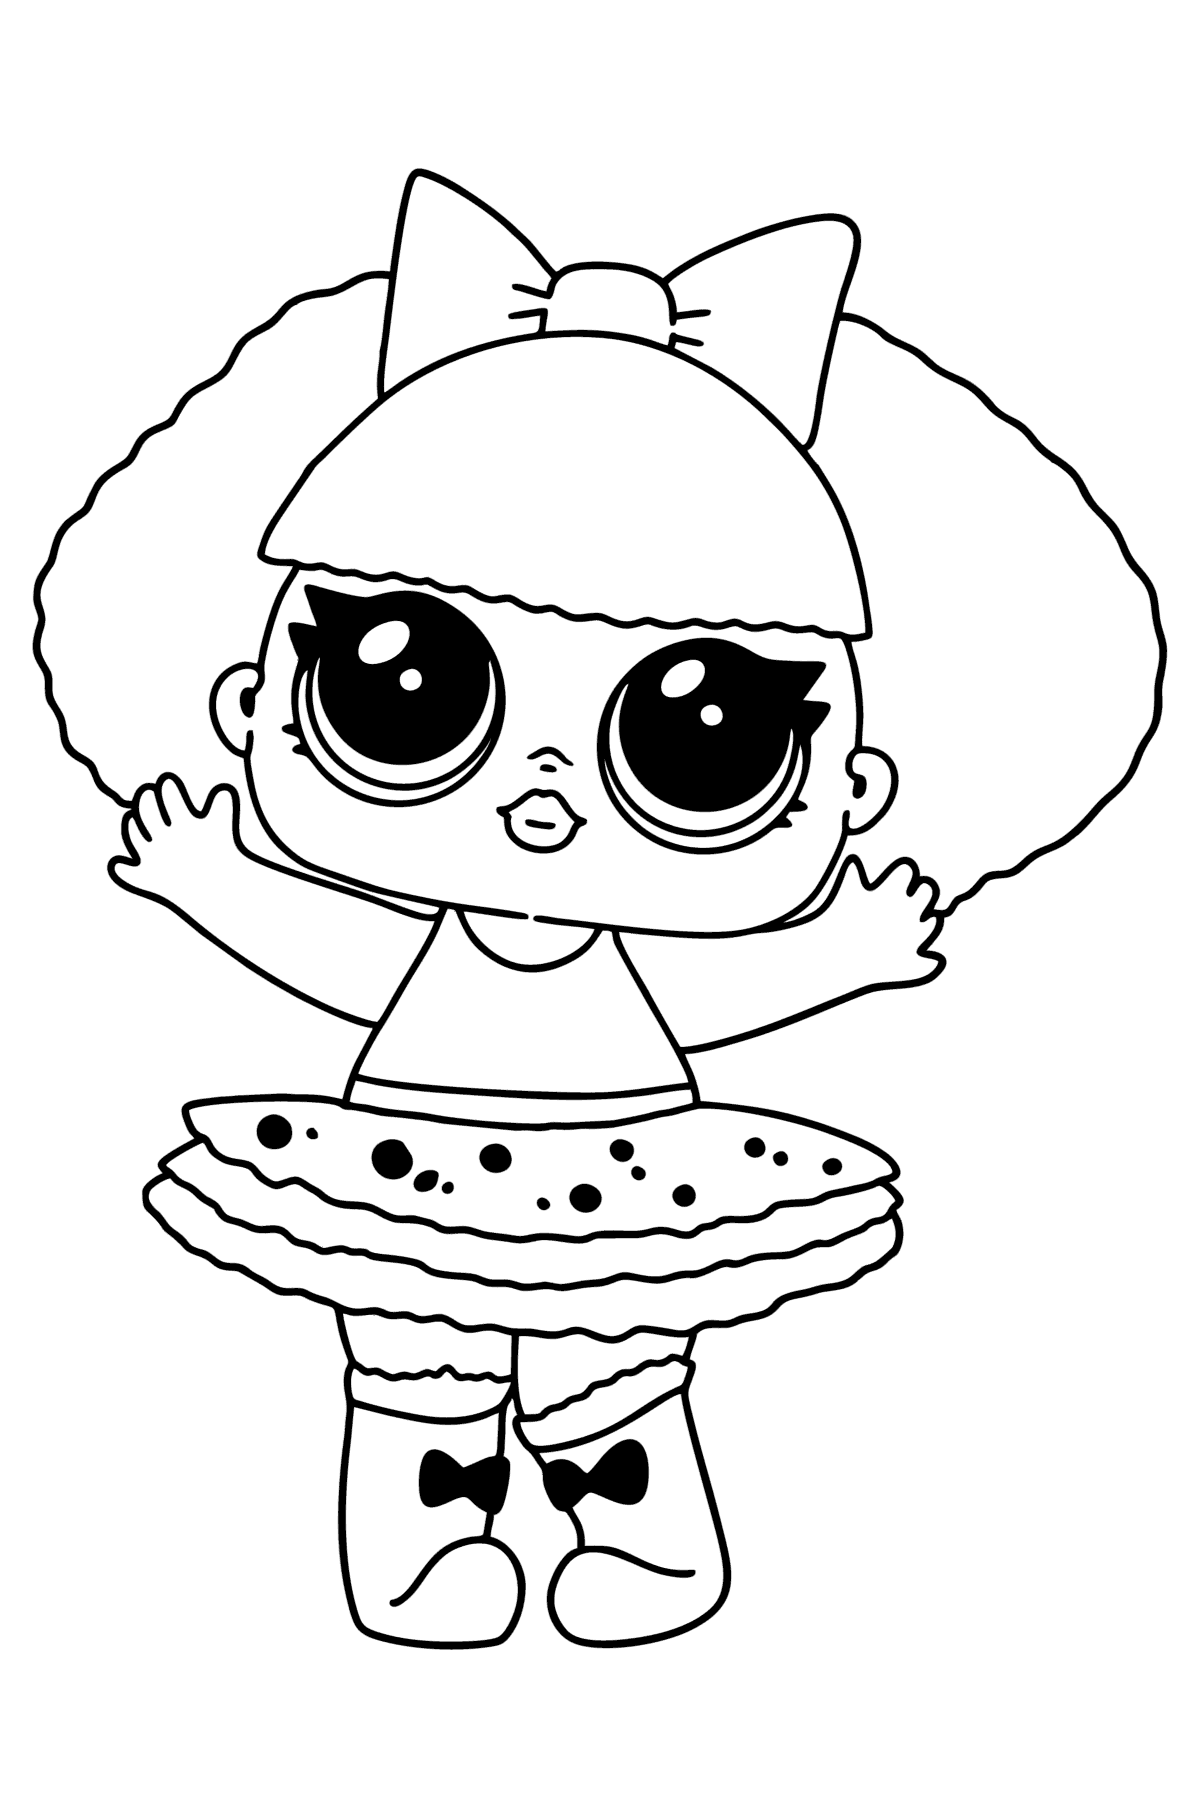 LOL Surprise Diva coloring page - Coloring Pages for Kids